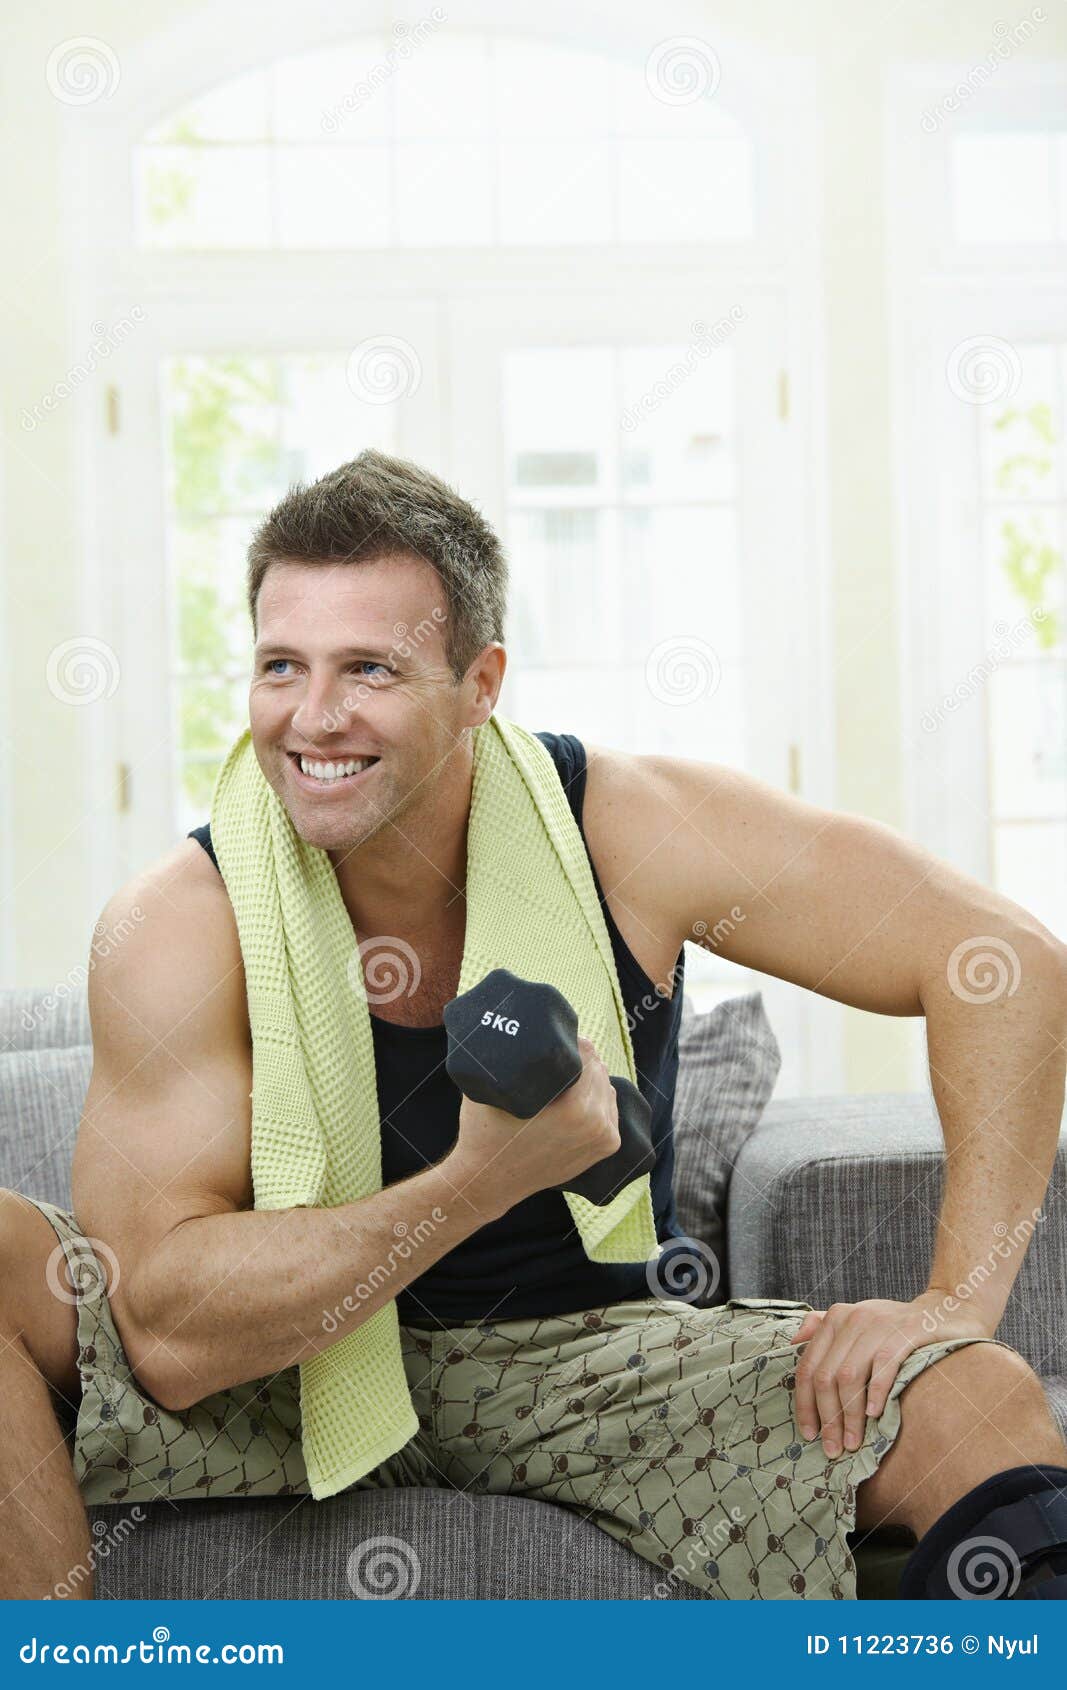 Muscular Man Doing Excercise Stock Photo - Image of alone, furniture ...